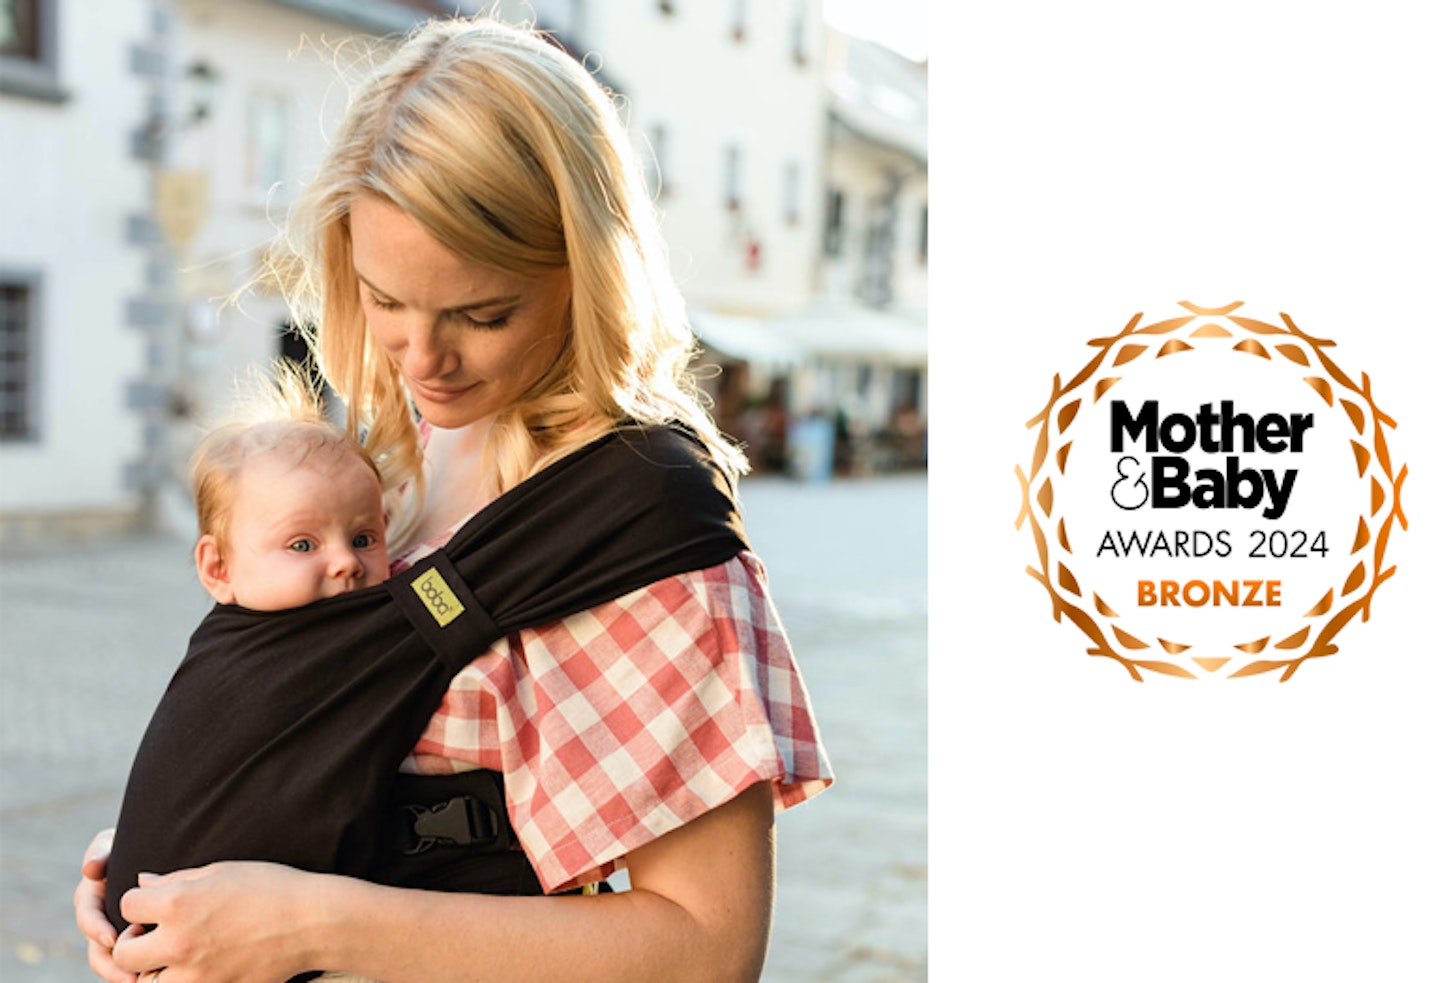 Boba Bliss Baby Carrier